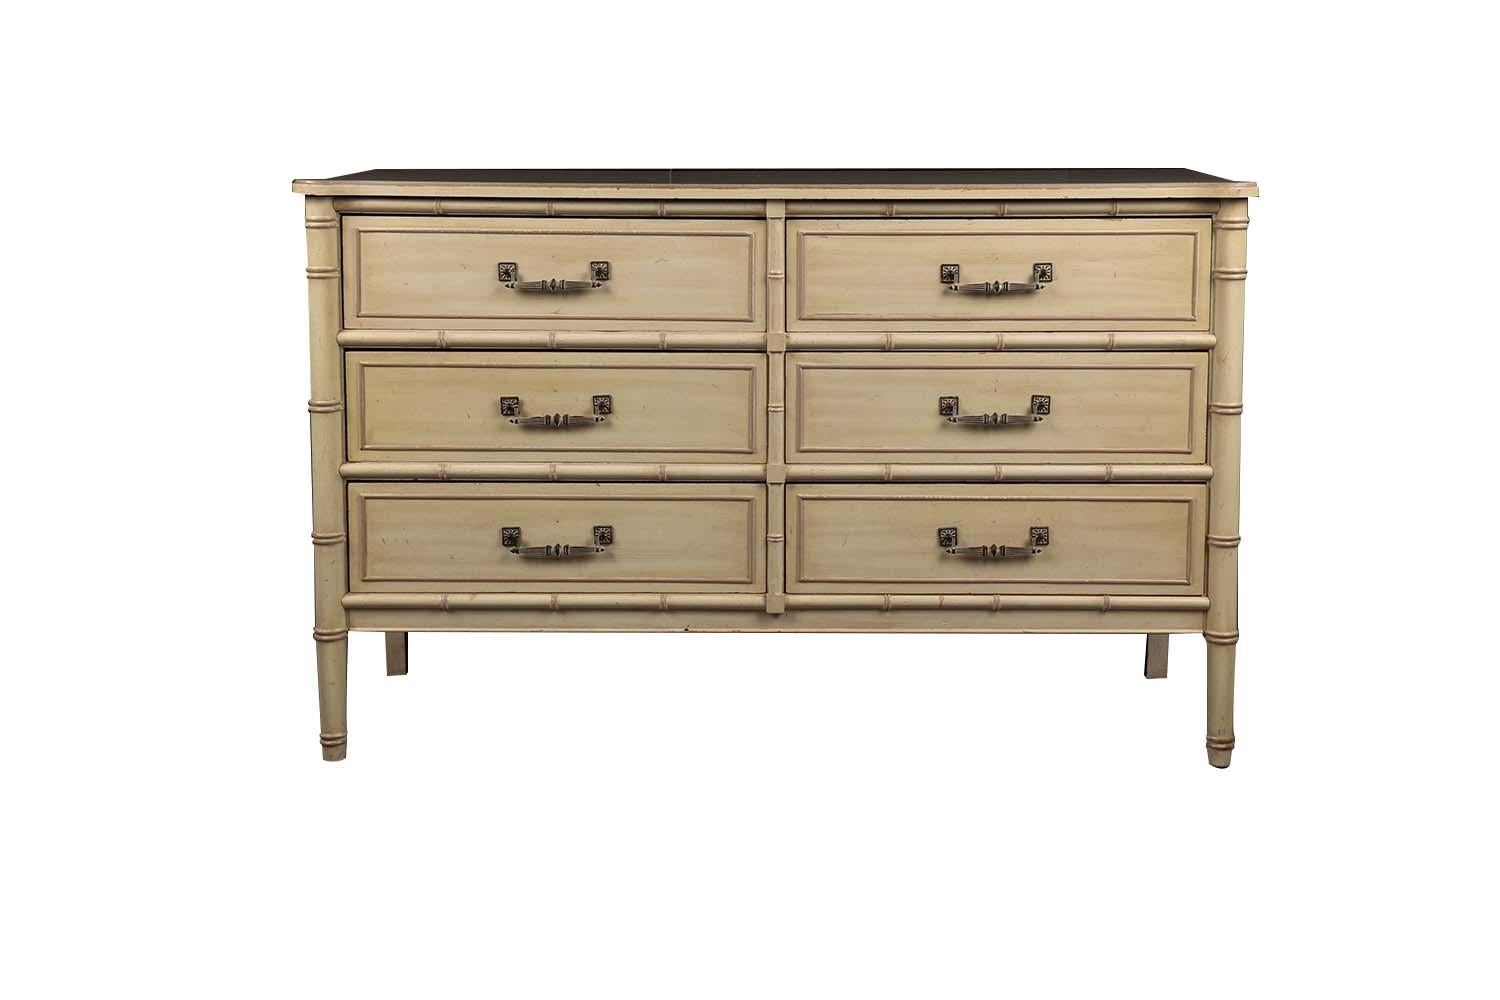 Attractive vintage six drawer faux bamboo dresser circa 1960s. Crafted by the Henry Link Trading Co. from the Bali Hai collection. This dresser features water-resistant laminate top above classic Bali Hai design elements such as faux bamboo and